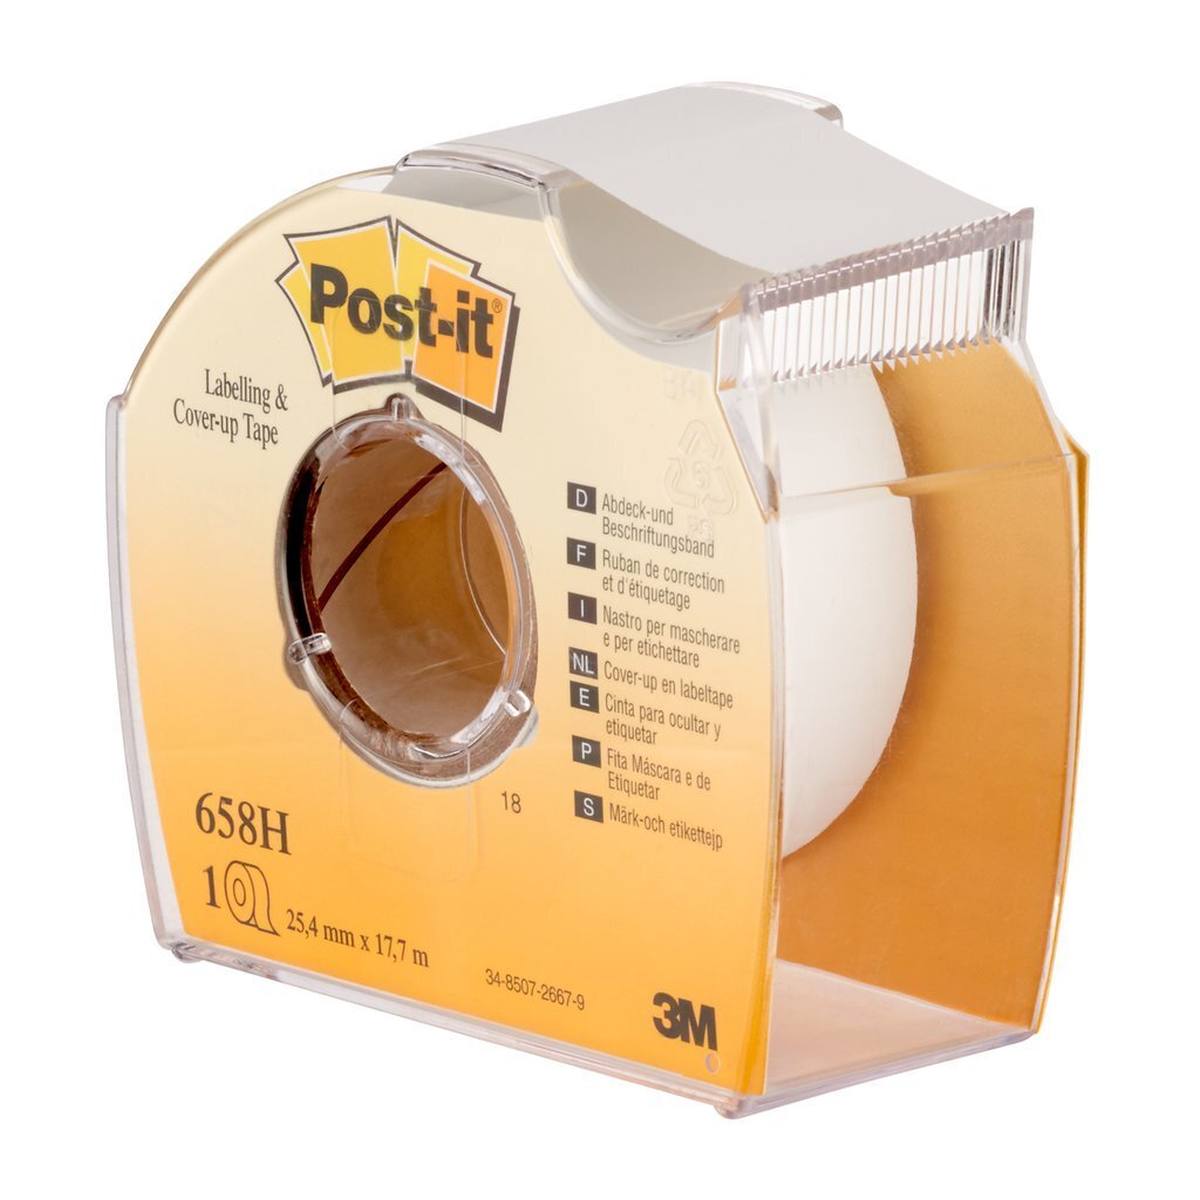 3M Post-it Masking and labelling tape 658H, 25.4 mm x 17.7 m, white, 1 roll in hand dispenser